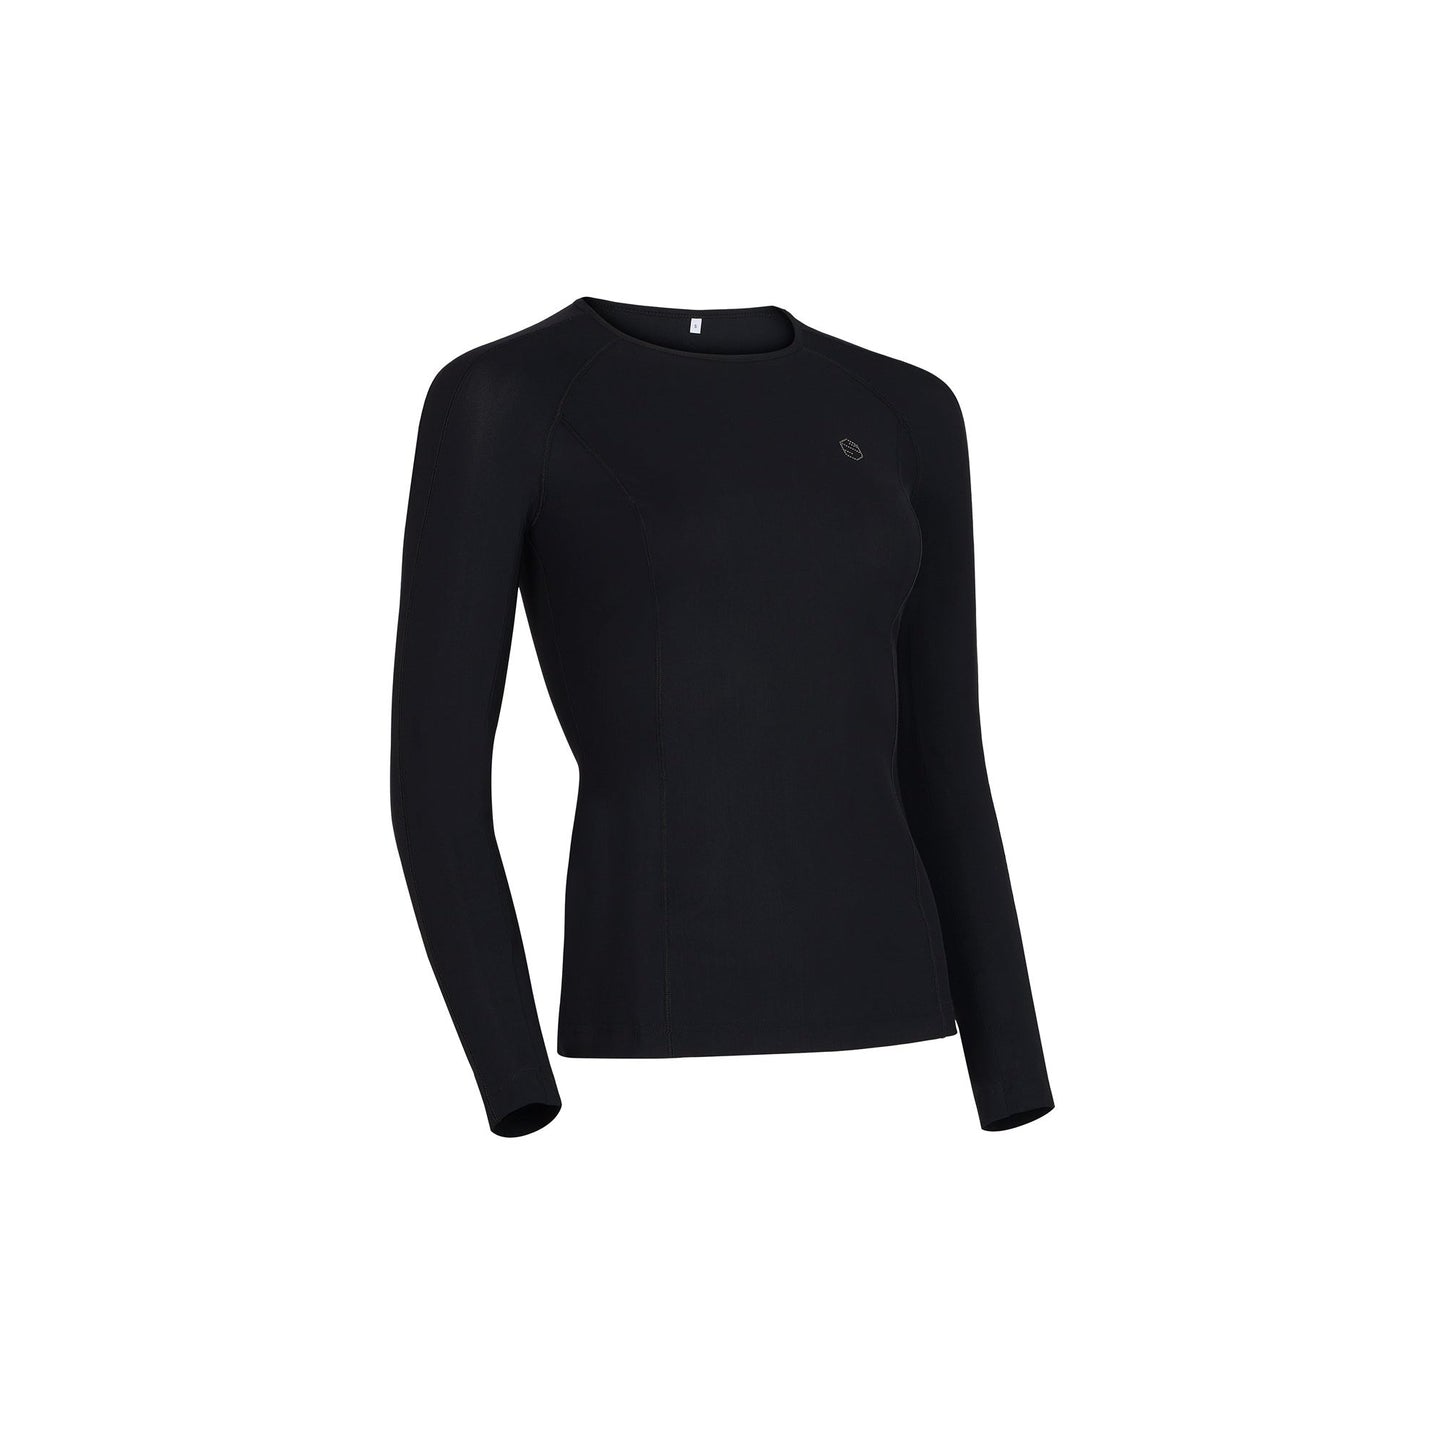 Samshield Evy Long Sleeve Training Shirt-Trailrace Equestrian Outfitters-The Equestrian